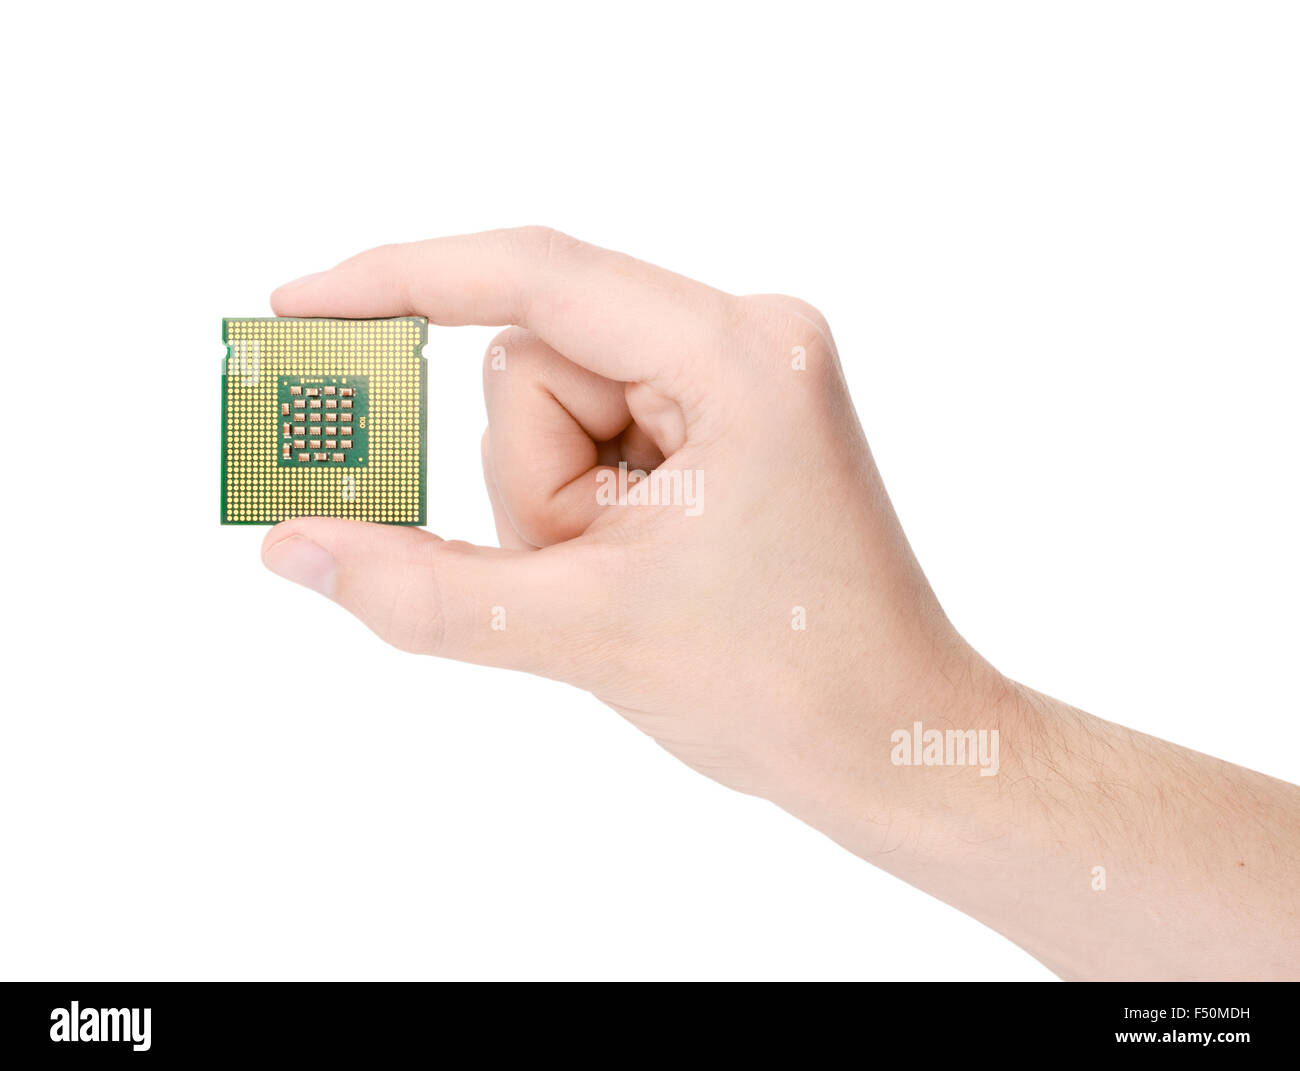 The processor is in male hands on a white background, isolated Stock Photo